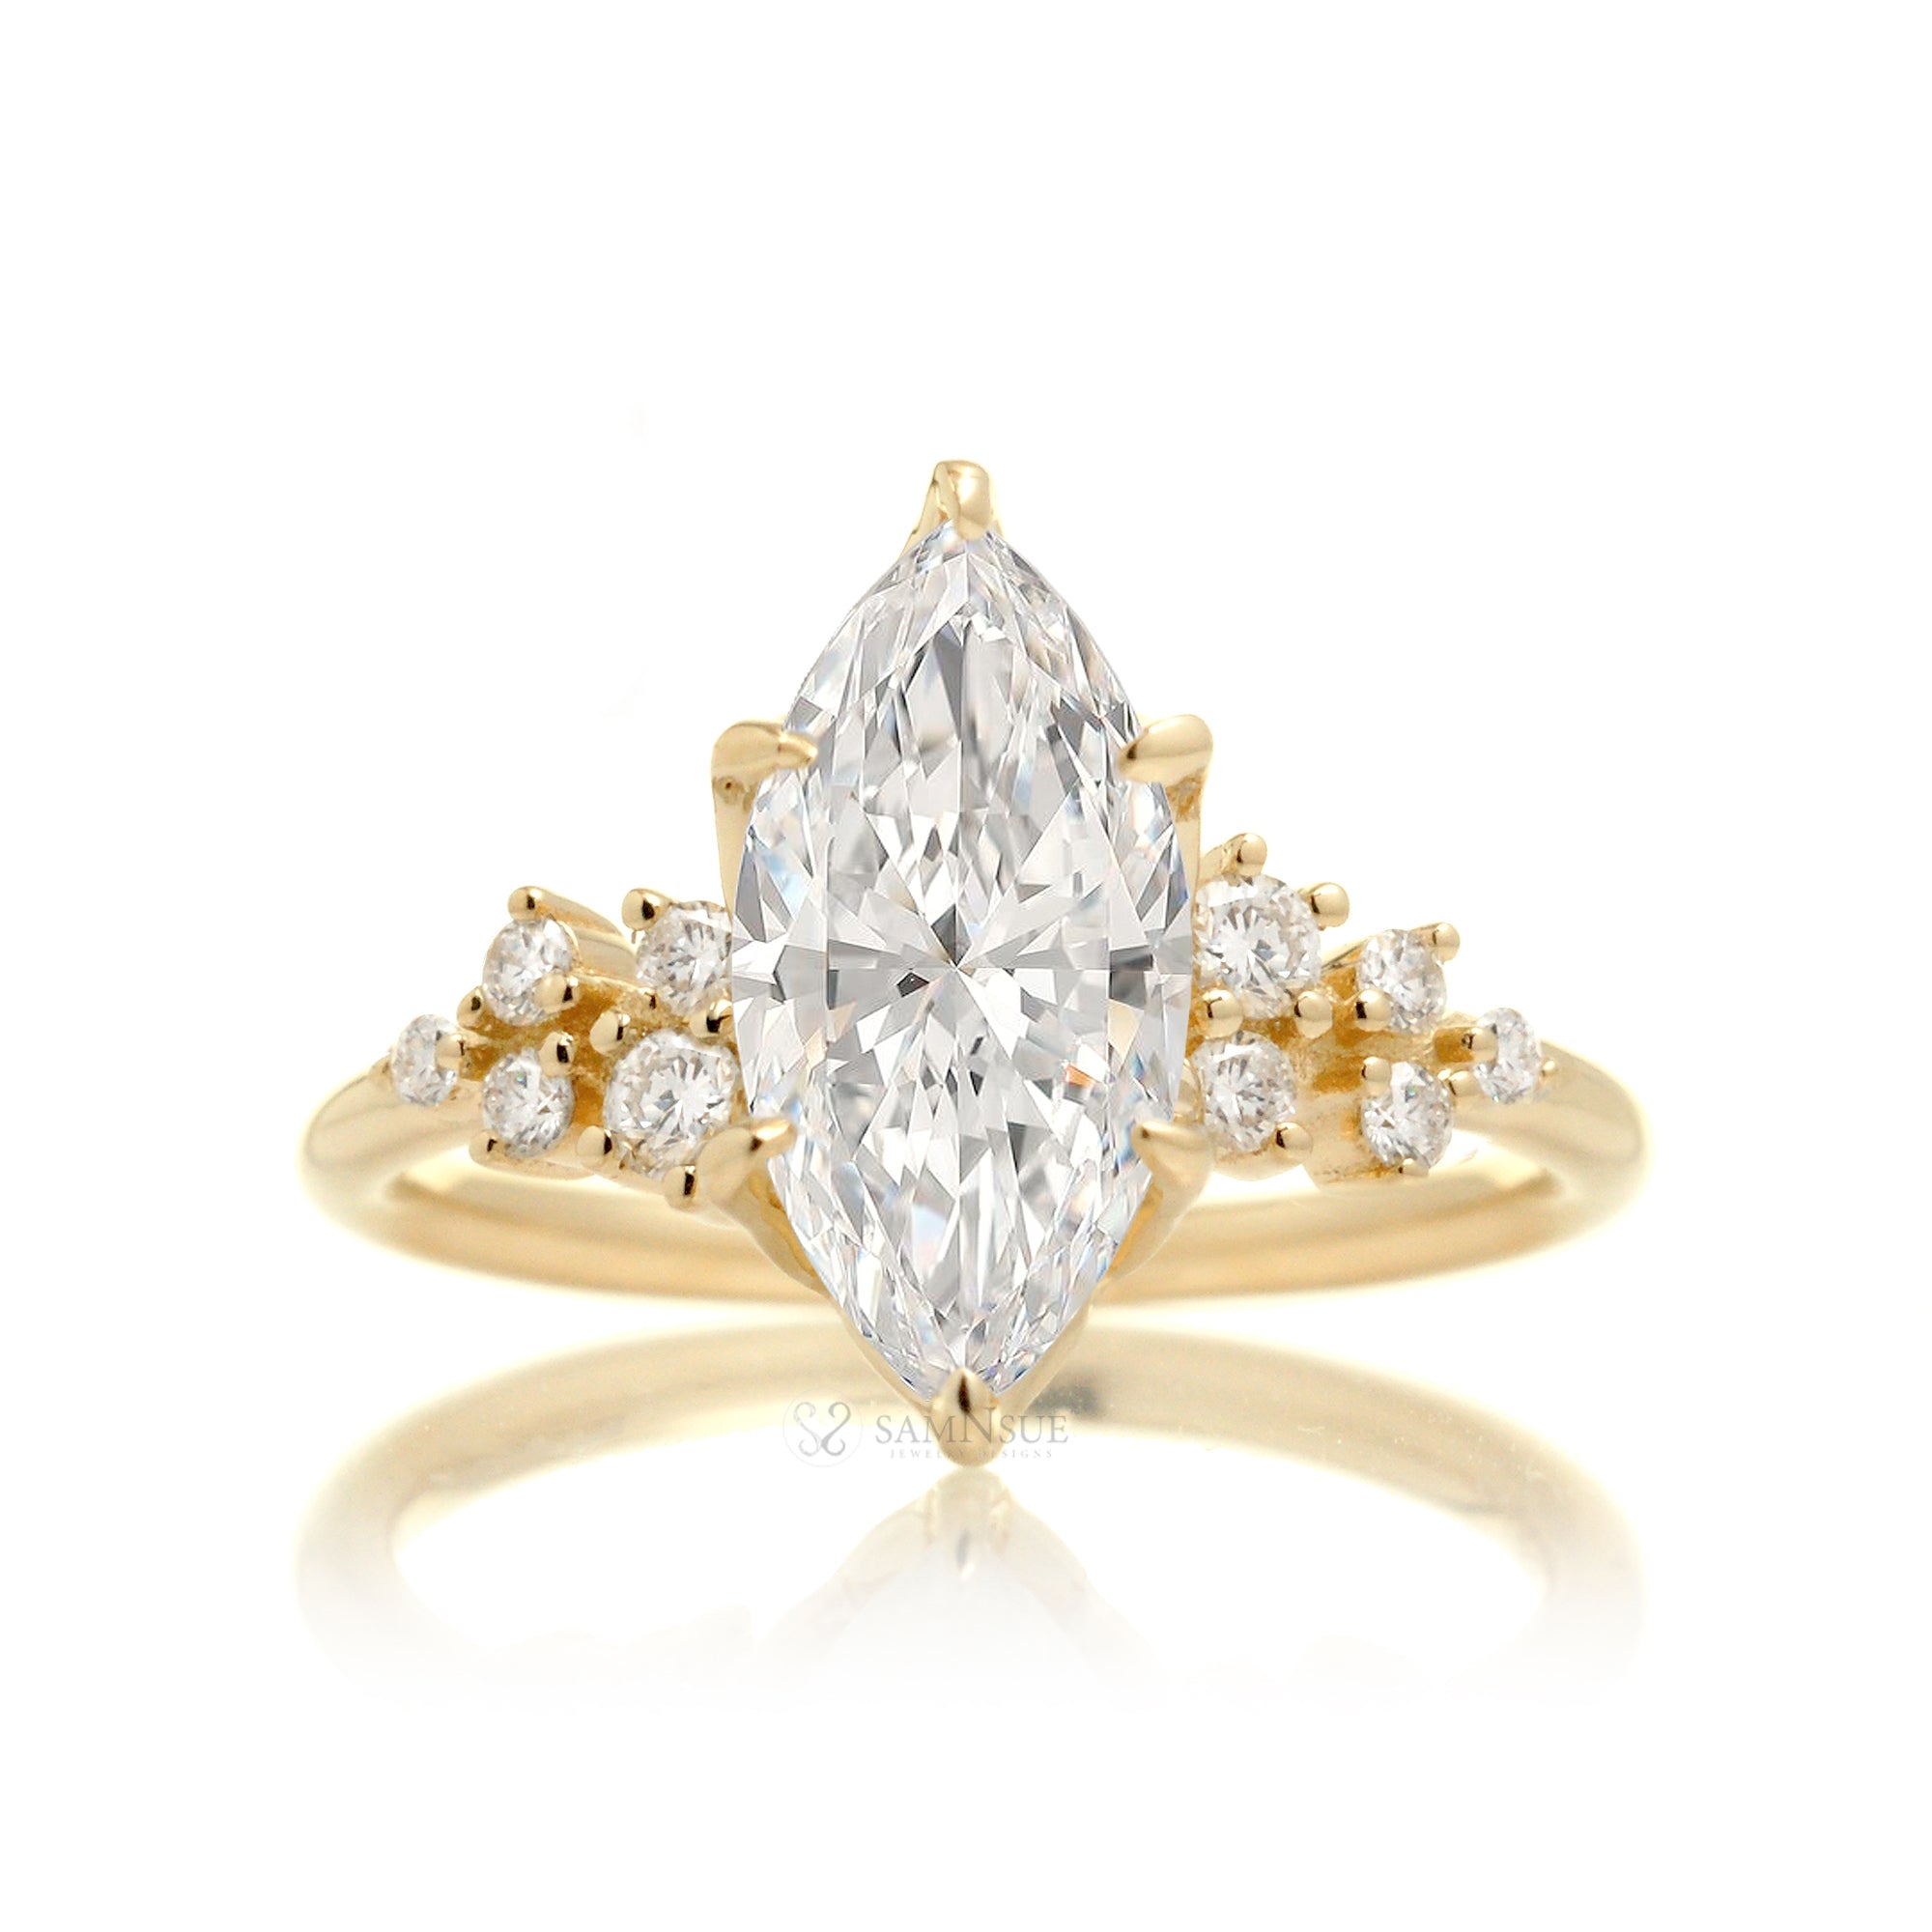 Marquise cut diamond solitaire with accent side constellation diamond in yellow gold